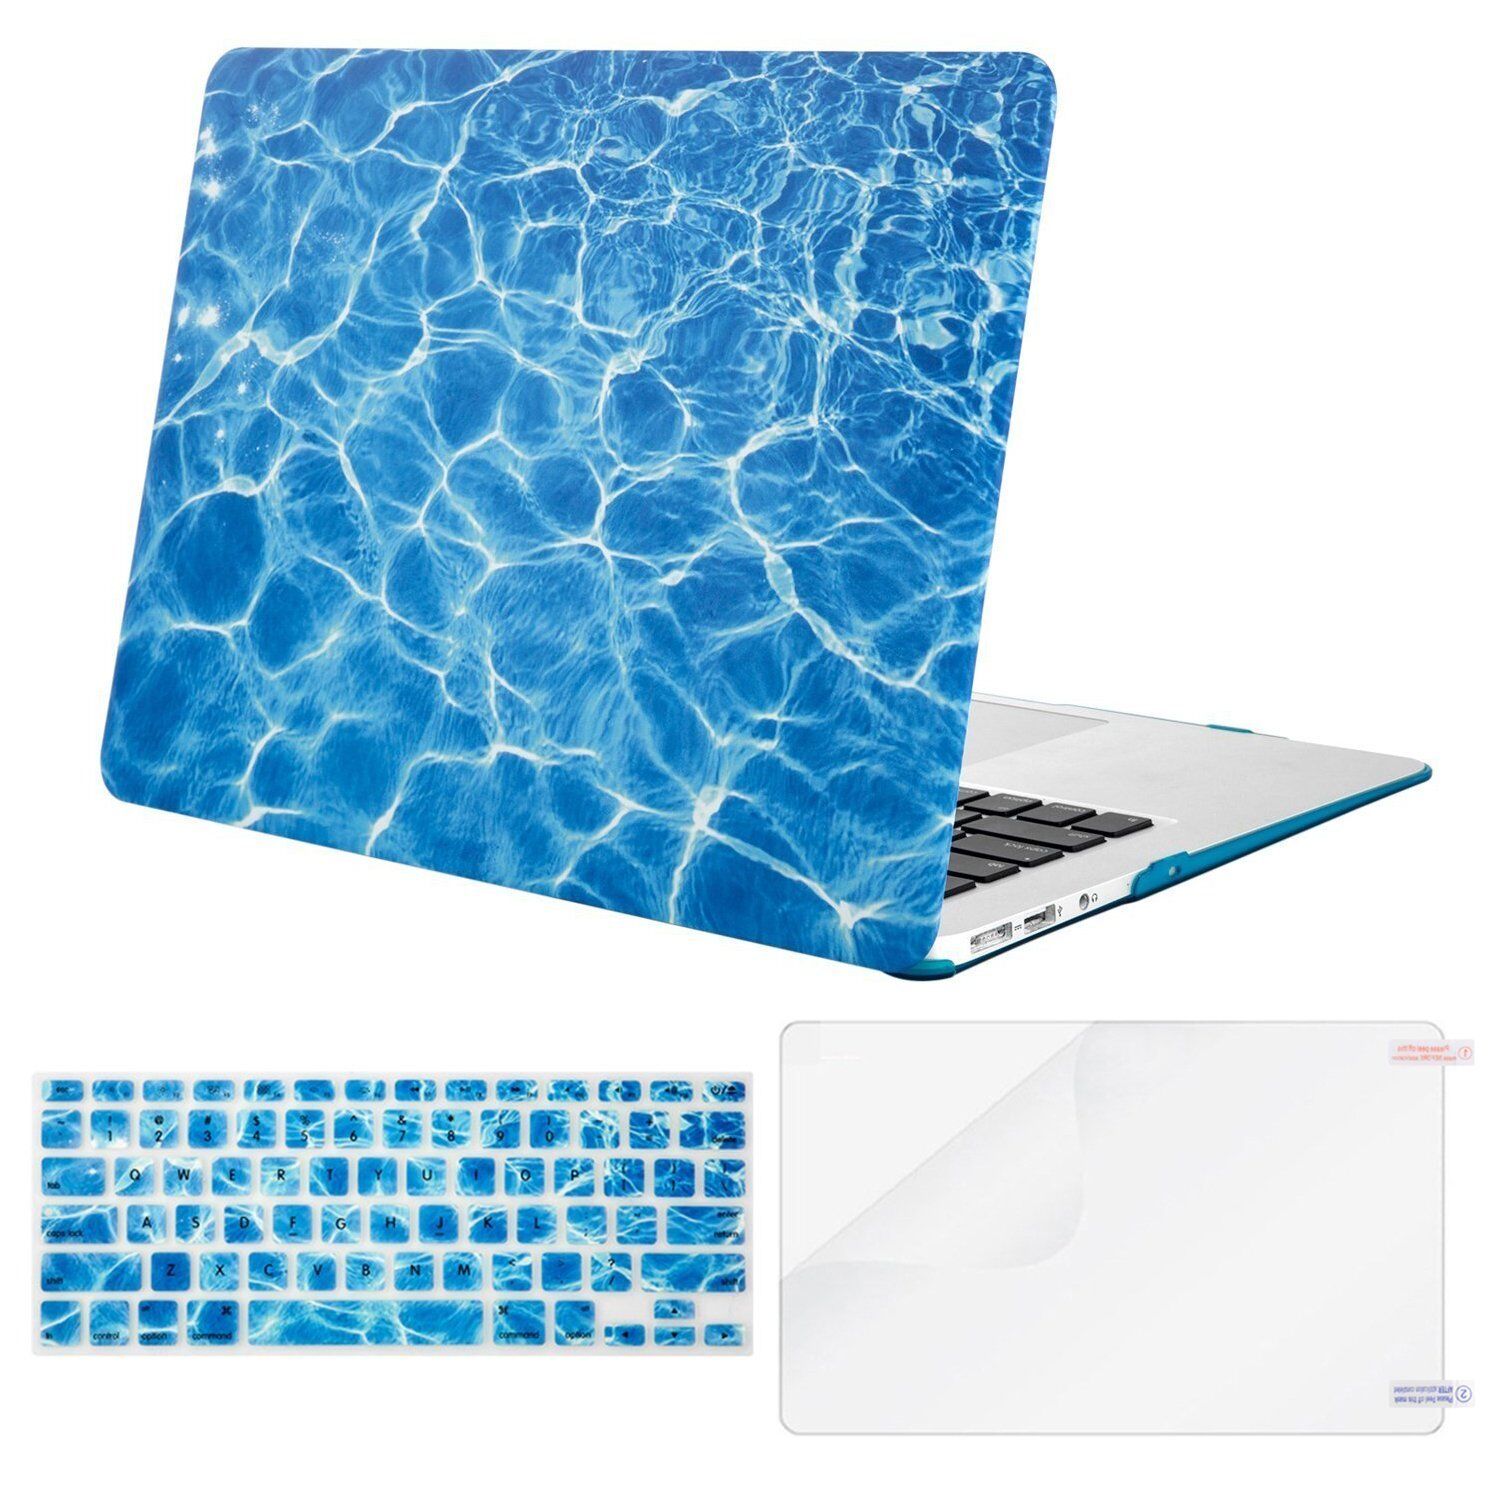 Laptop Hard Shell Case for Macbook Pro 13 Retina Air 13.3 Laptop Cover 2012-2015